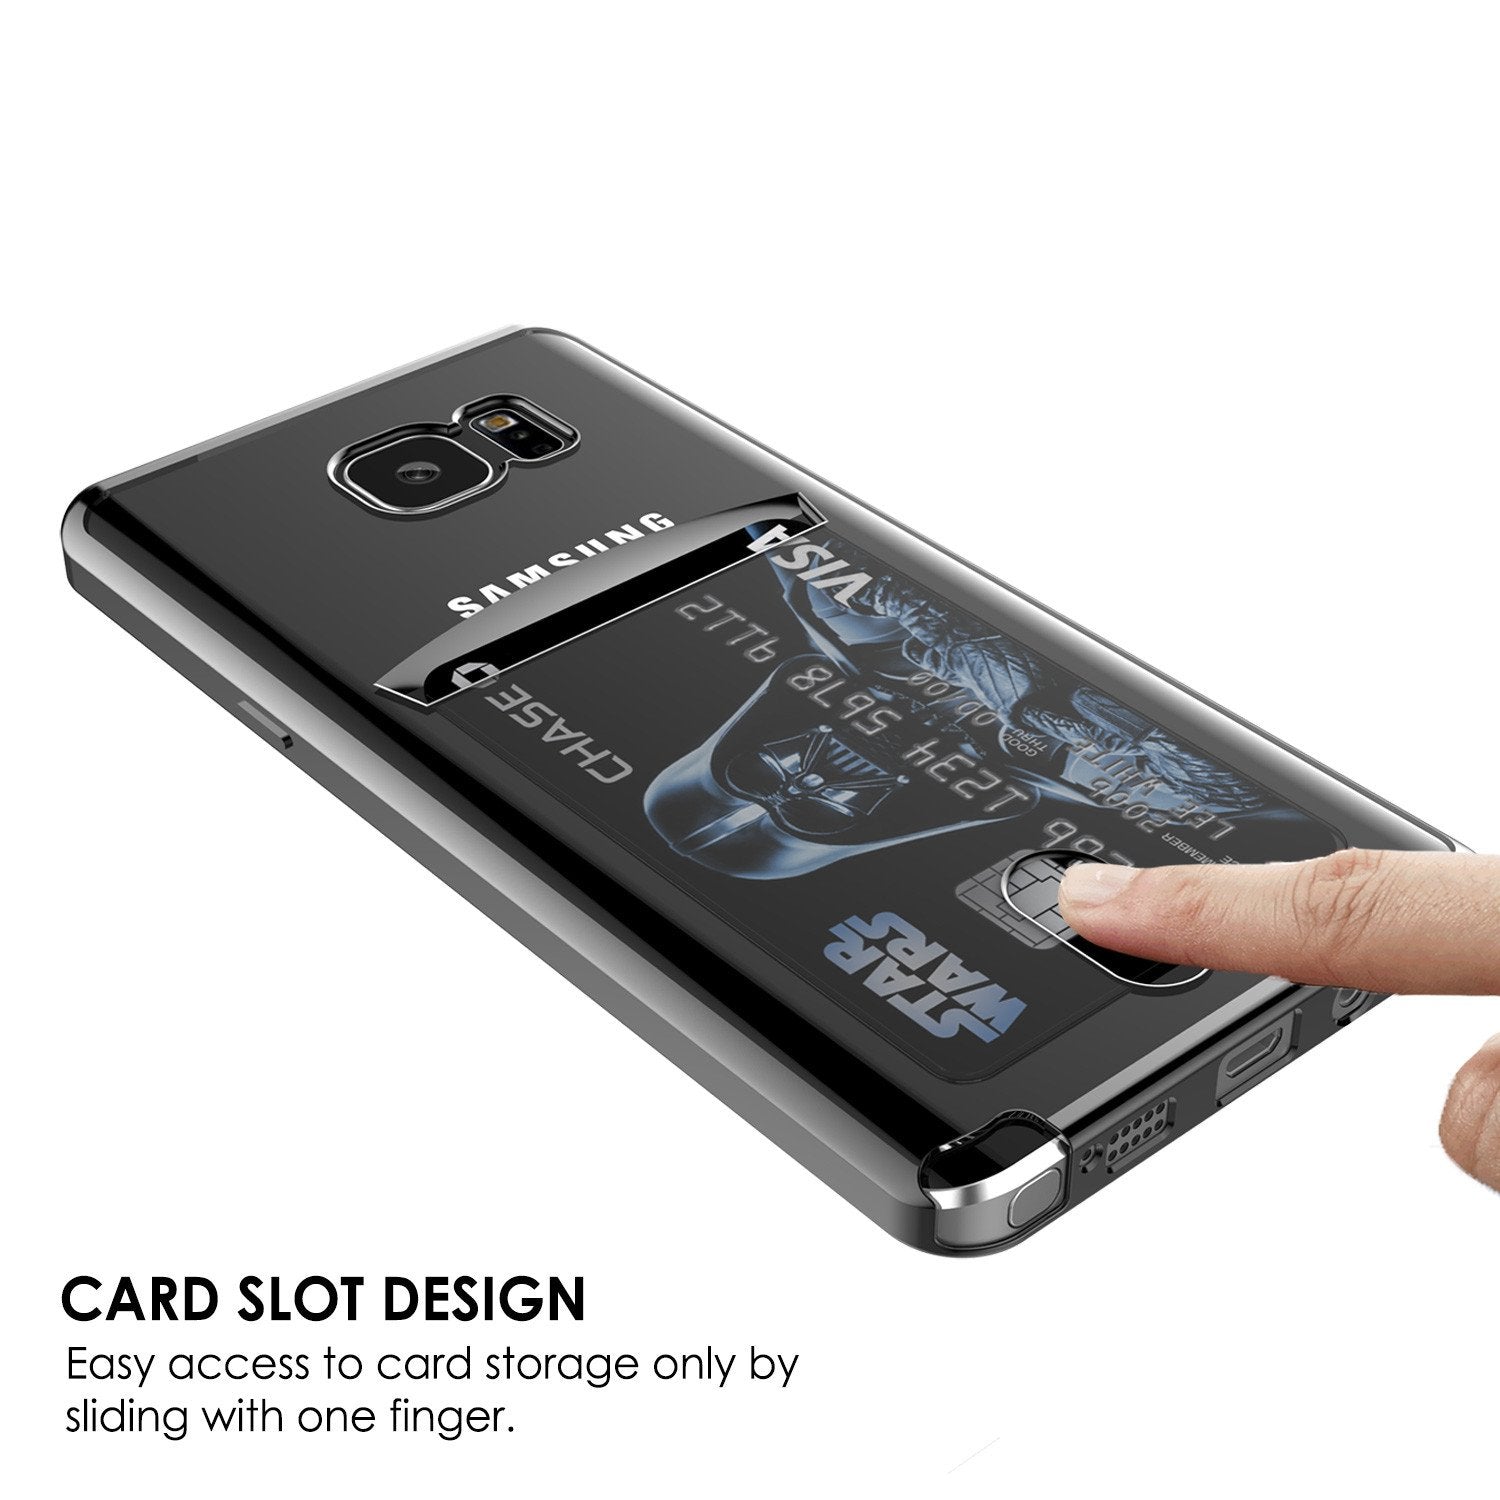 Galaxy Note 5 Case, PUNKCASE® LUCID Black Series | Card Slot | SHIELD Screen Protector | Ultra fit - PunkCase NZ